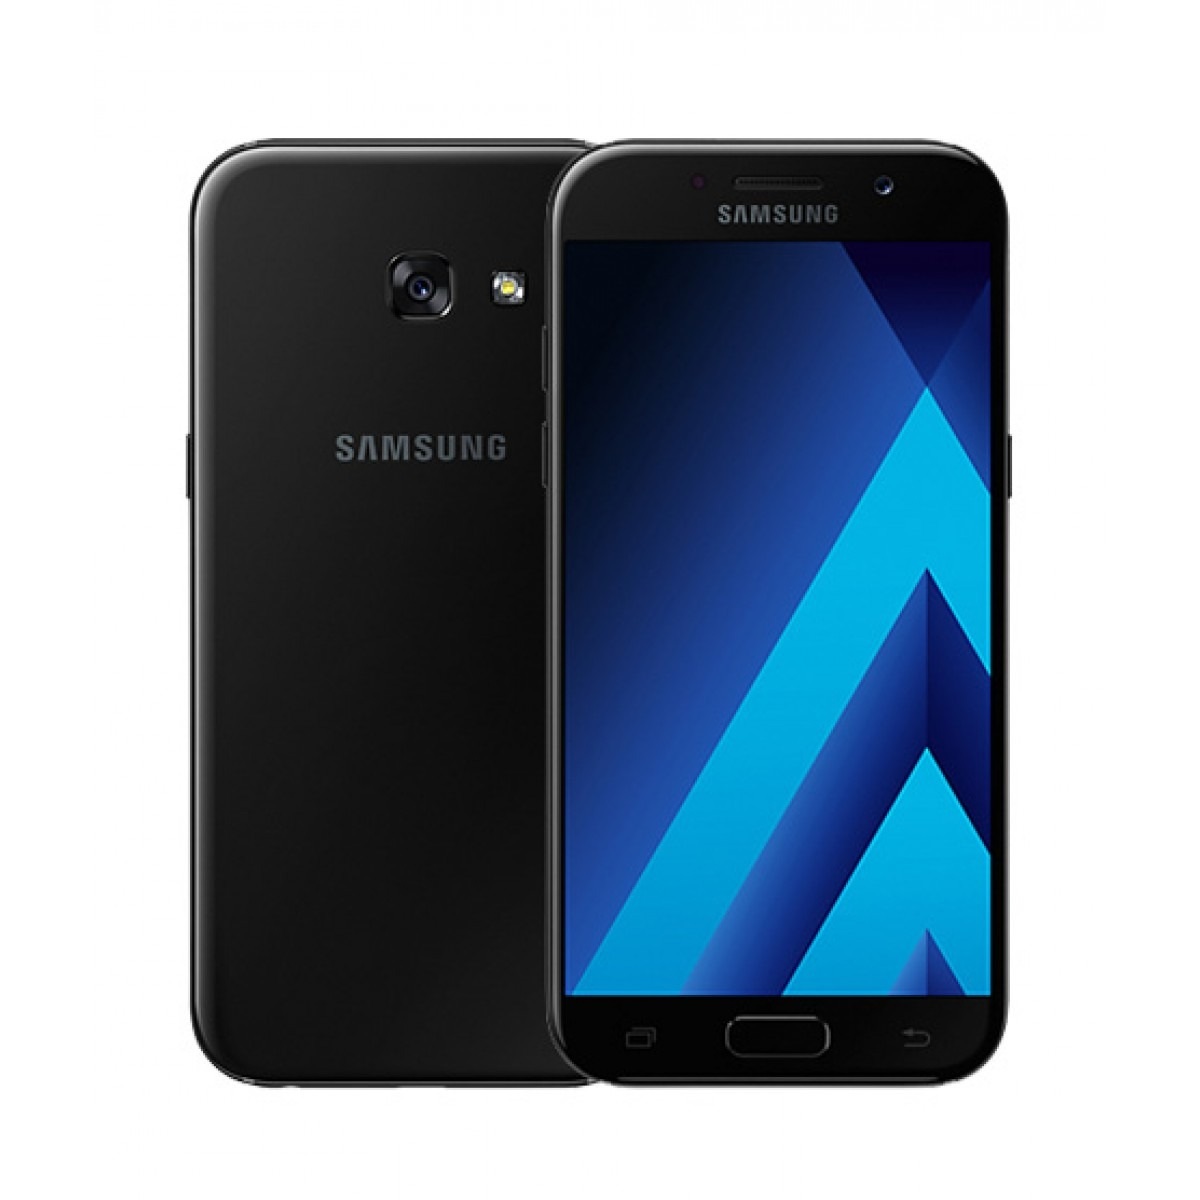 Samsung Galaxy A5 (2017) Features, Specs and Specials